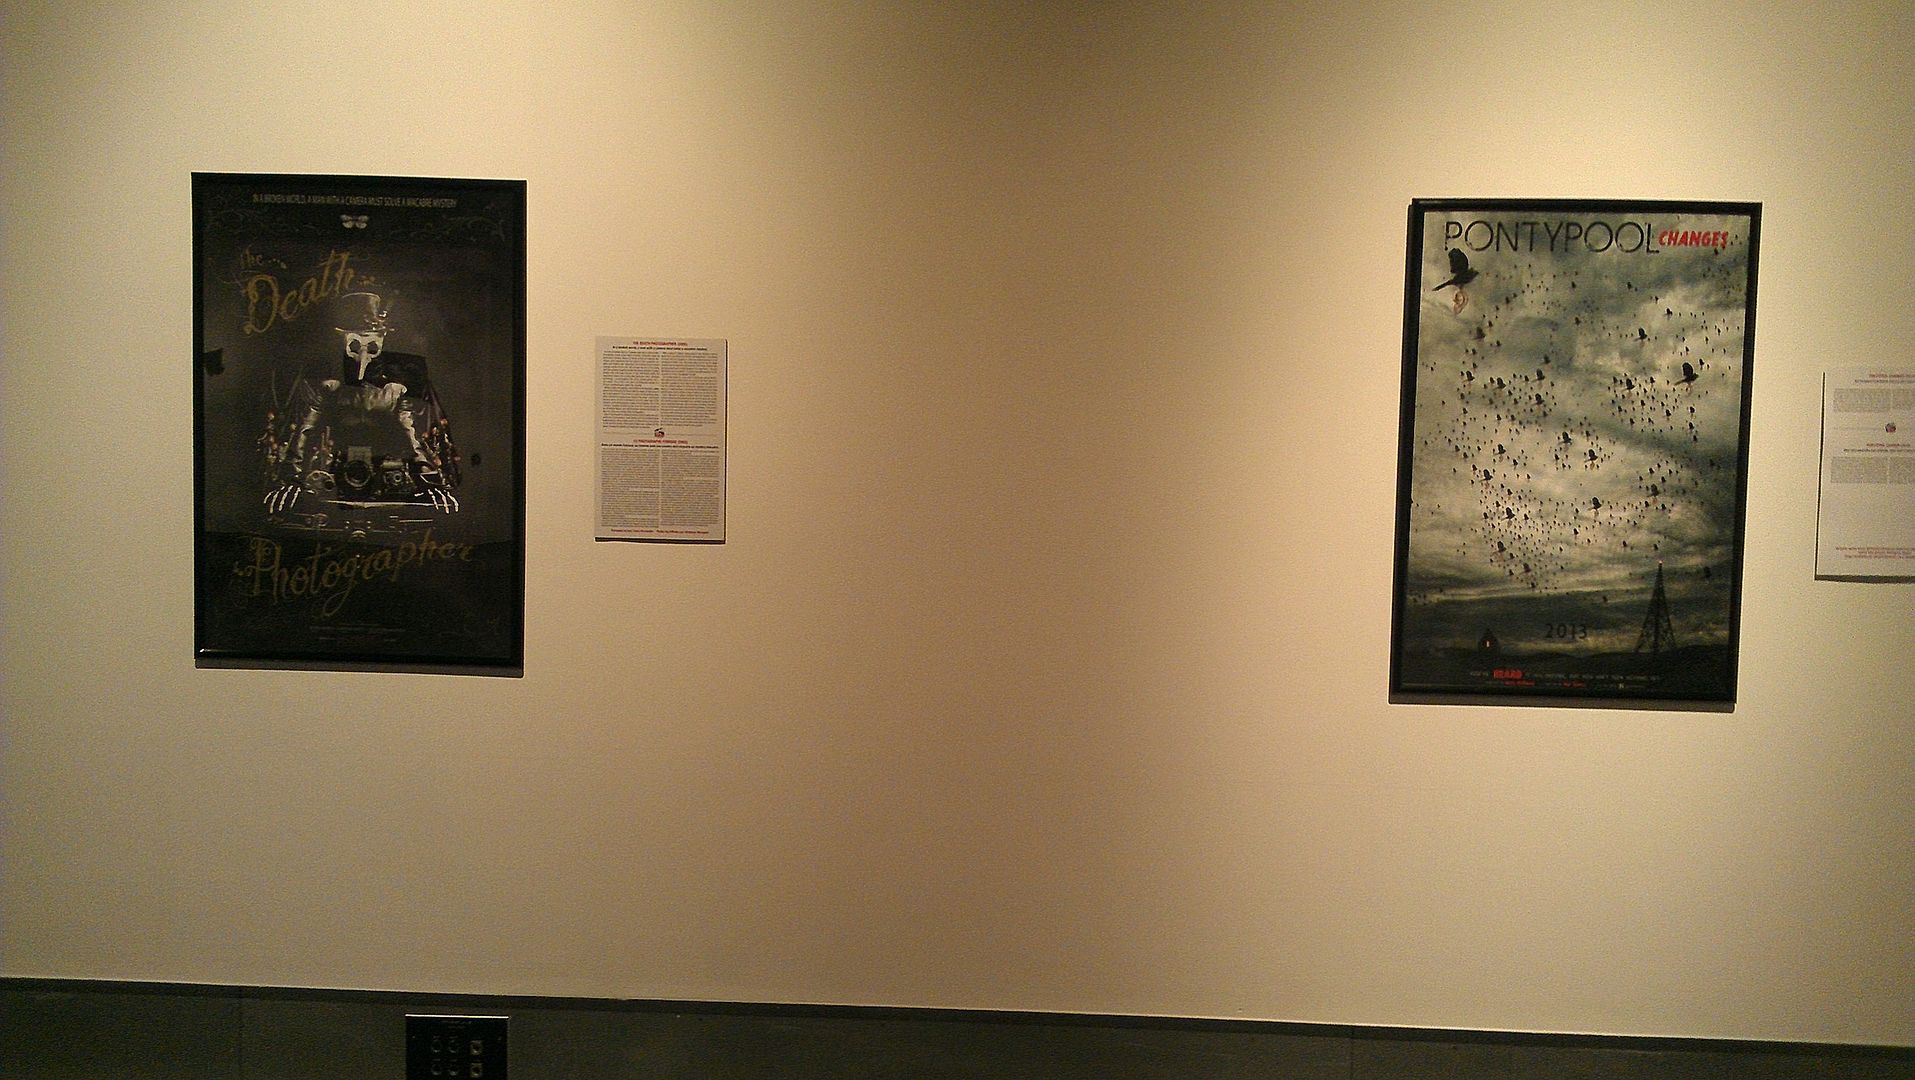 If They Came From Within, "The Death Photographer" and "Pontypool Changes" posters from "If They Came From Within"